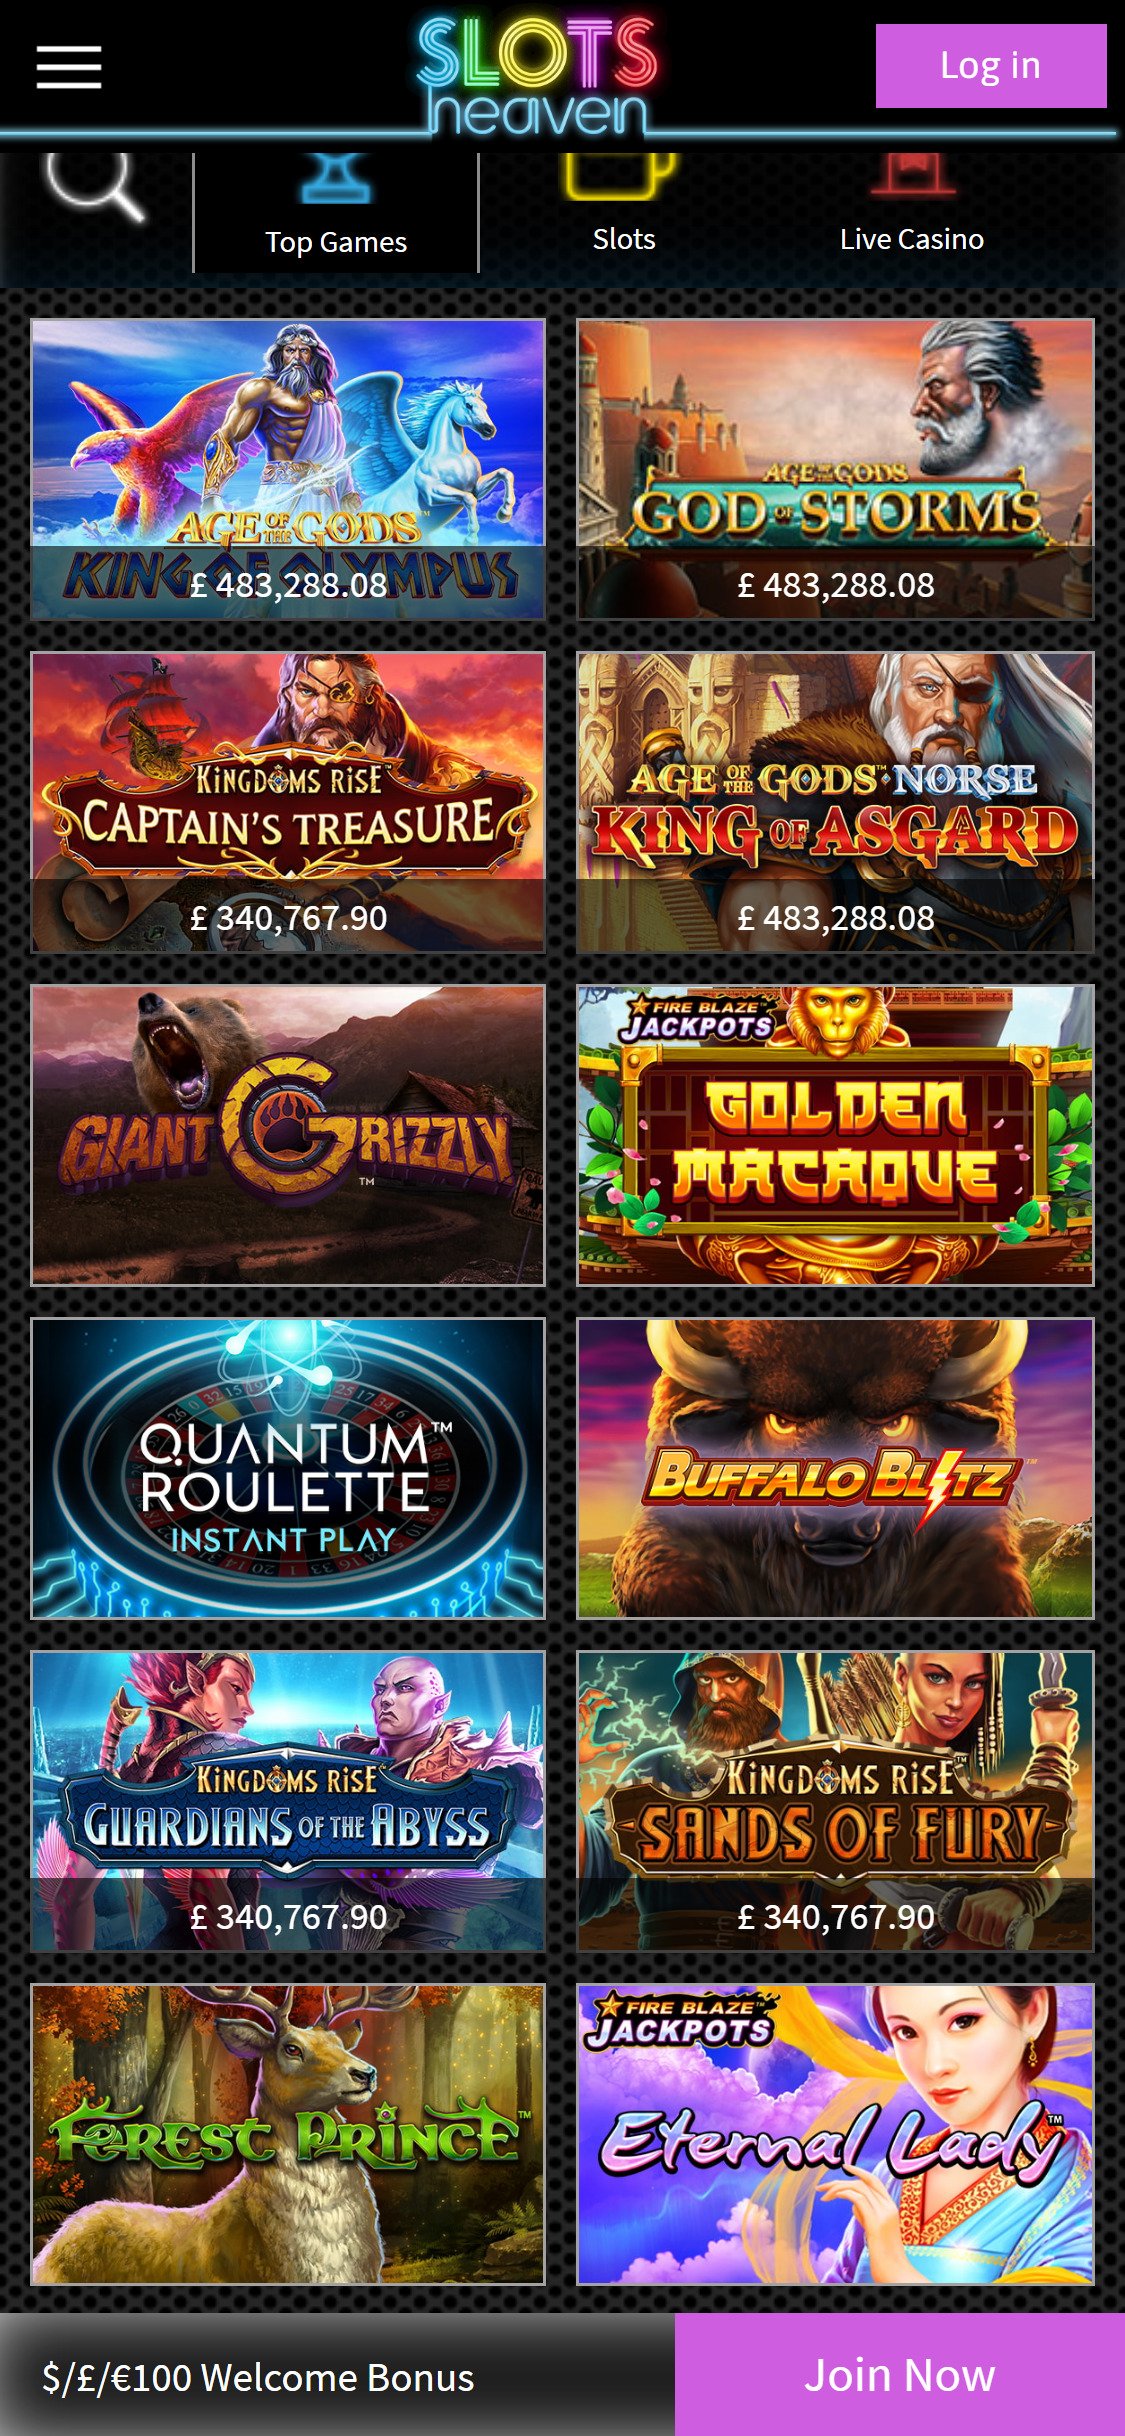 Slots Heaven Casino Mobile Games Review